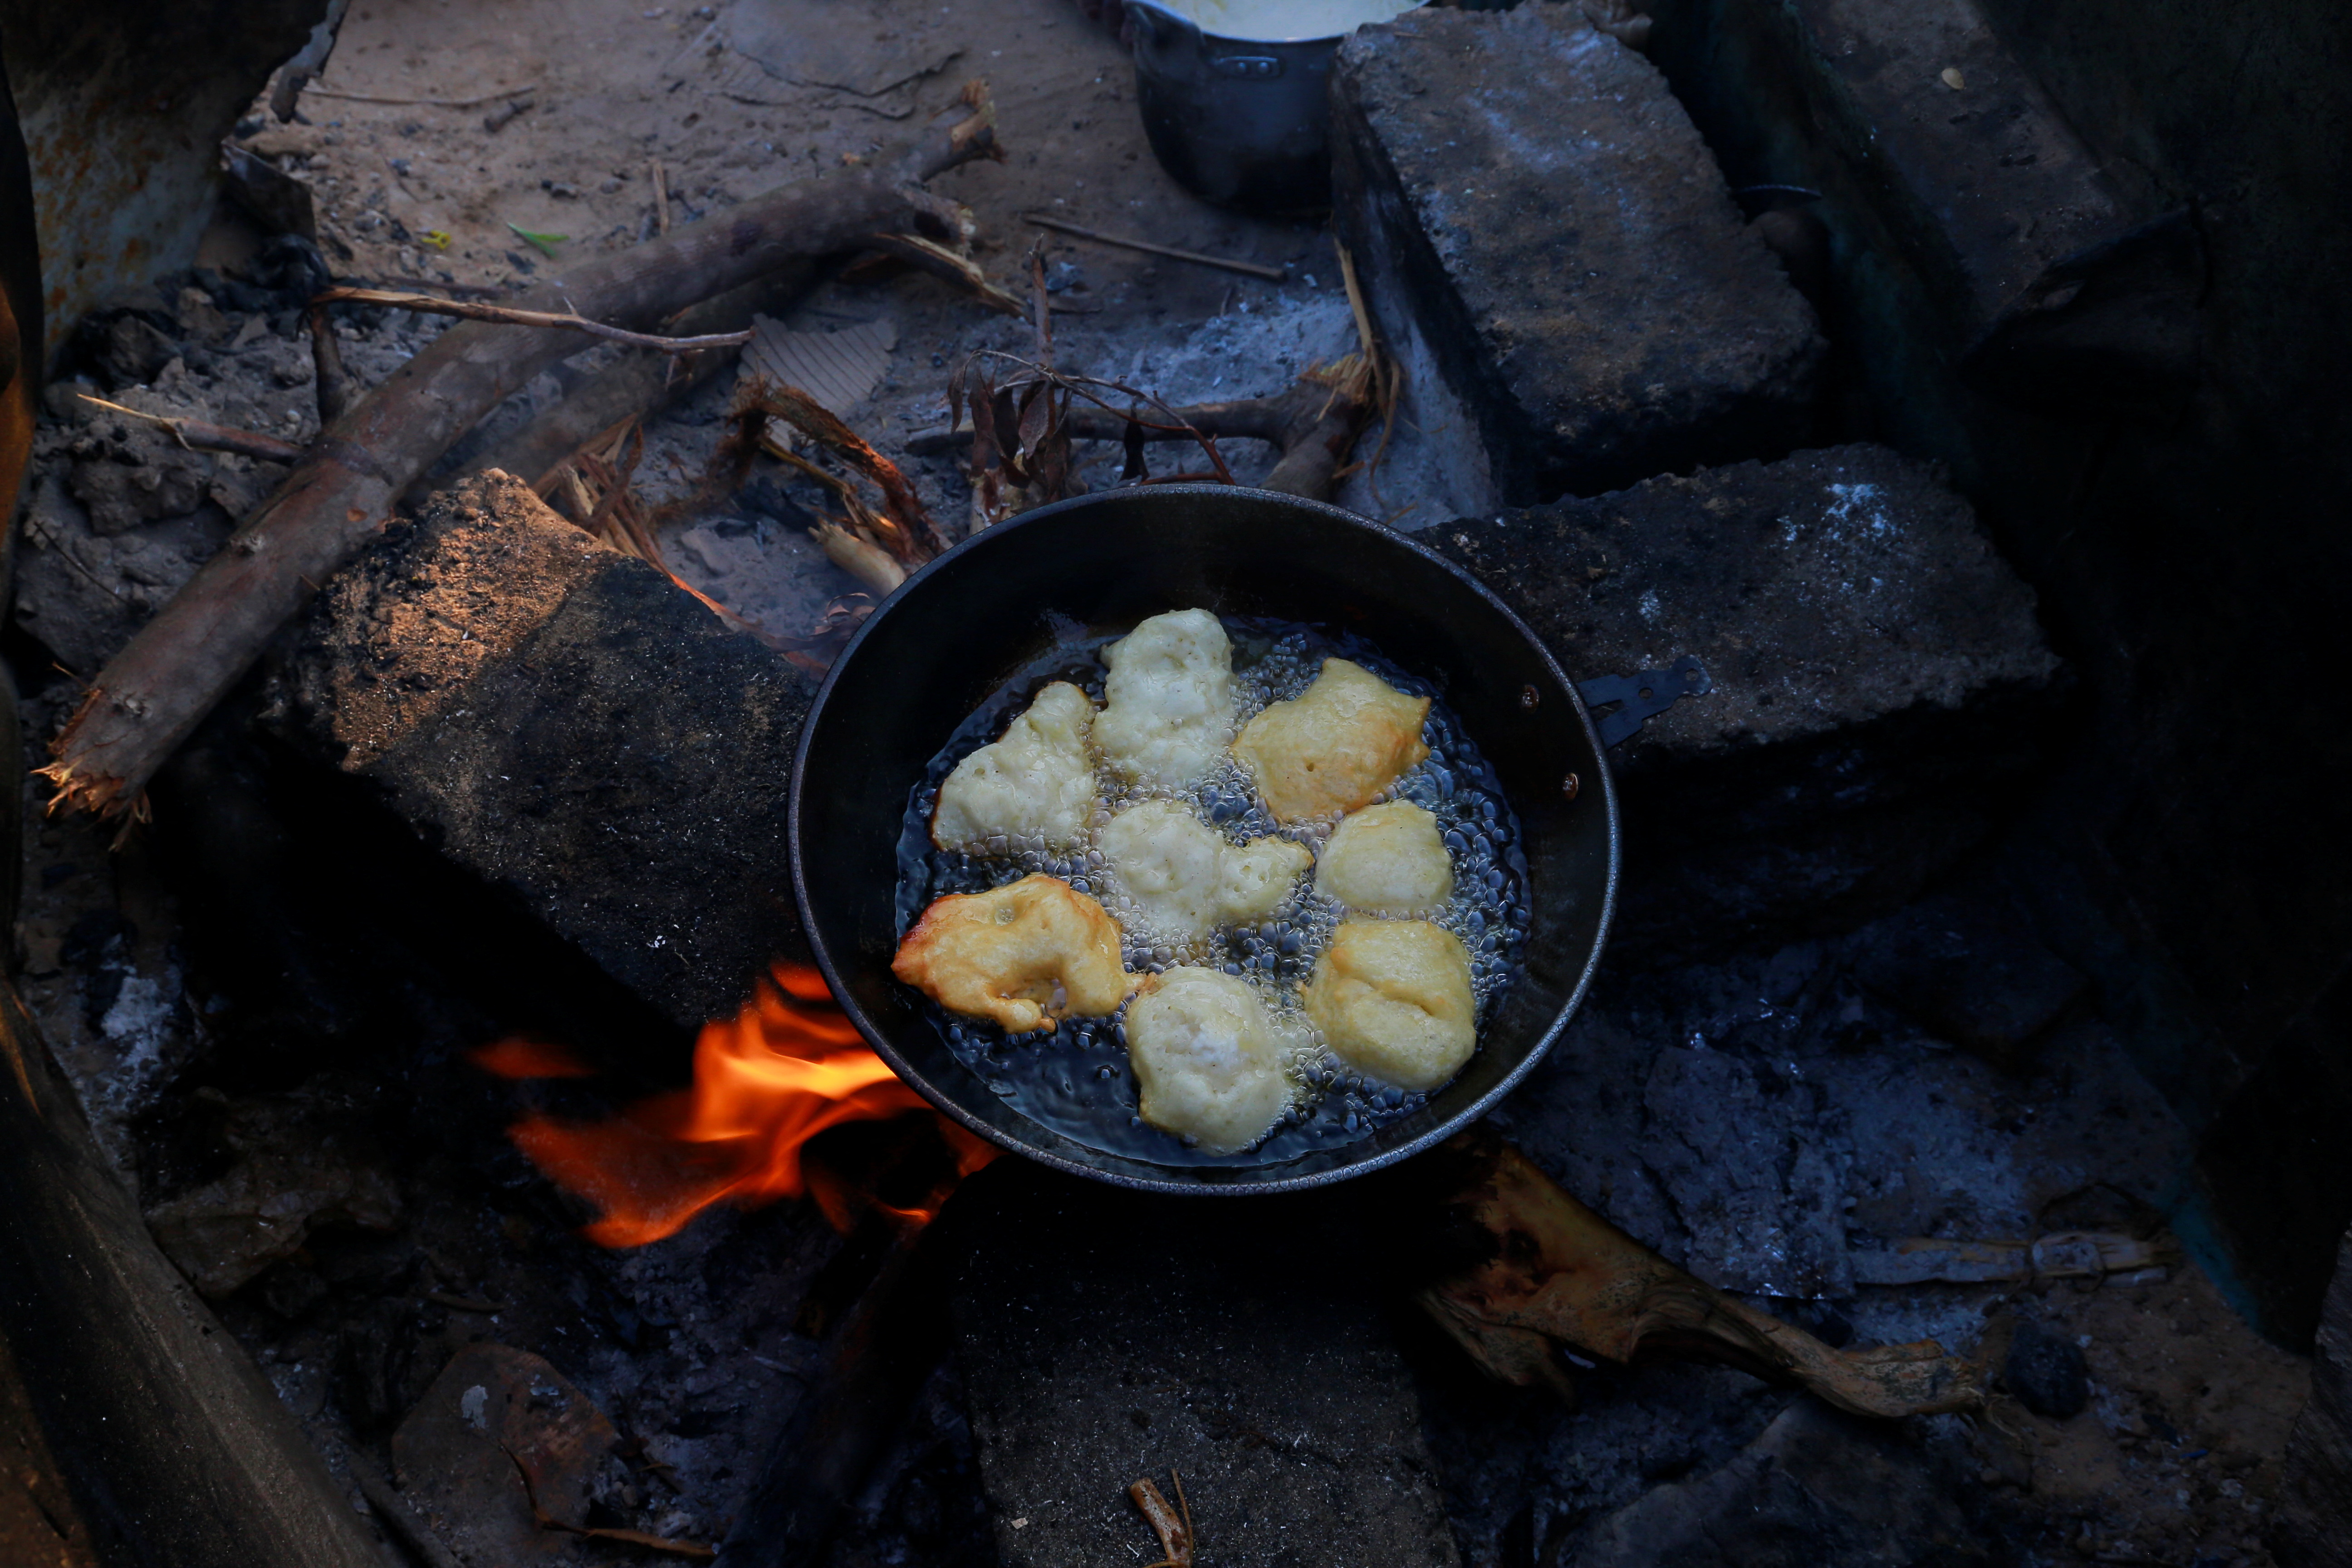 Meal is cooked at a camp for displaced people in al-Ghaidha